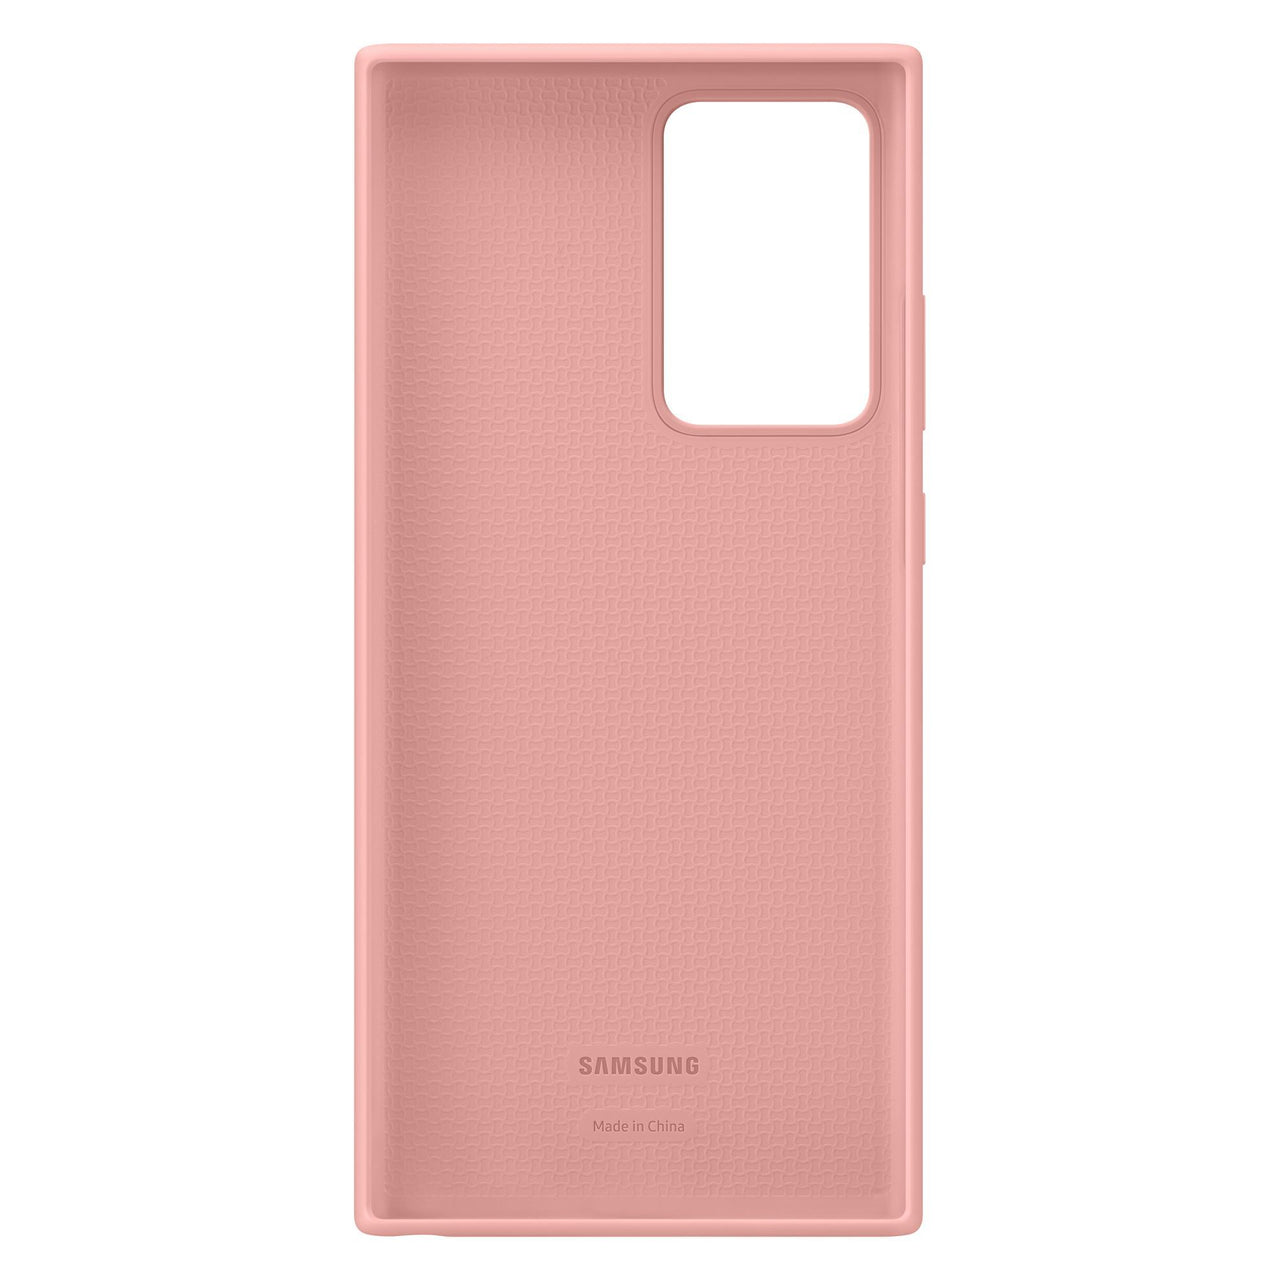 Samsung Silicone Cover for Galaxy Note20 Ultra - Brown